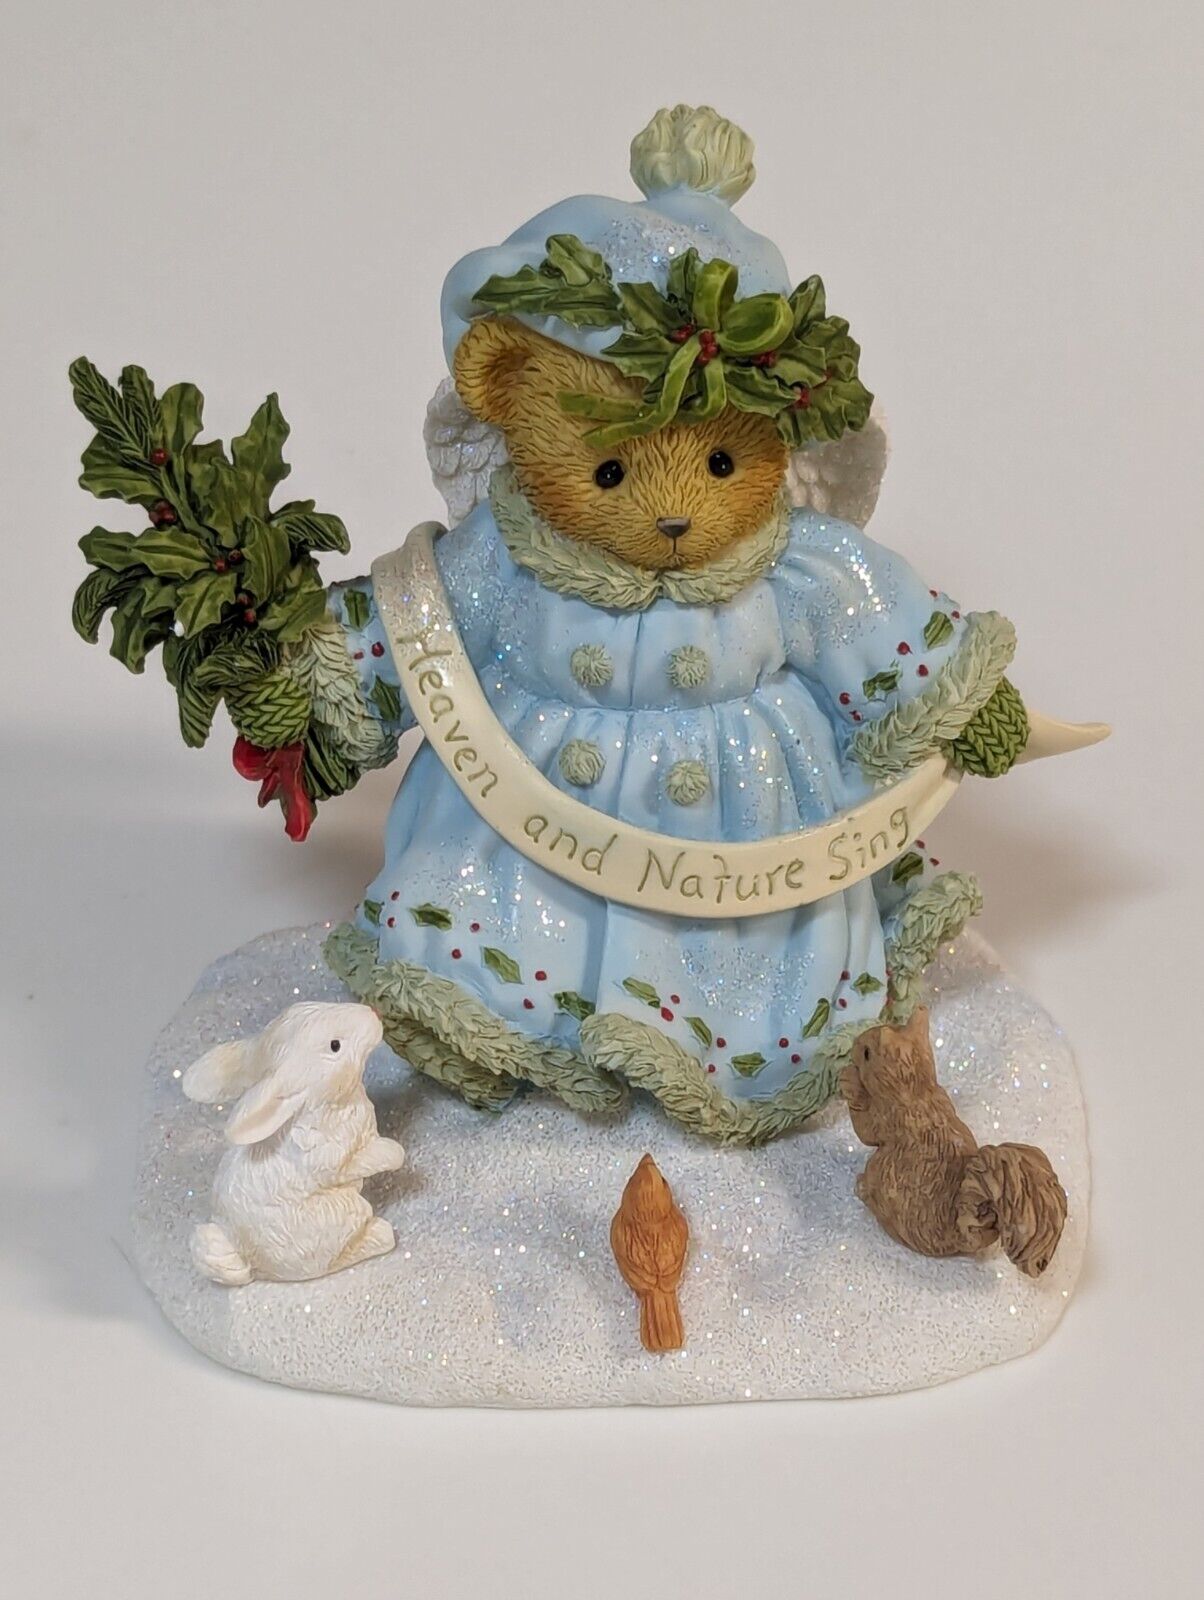 Cherished Teddies Heaven Rejoice And Nature Sing, Merianne, 4053475, Signed